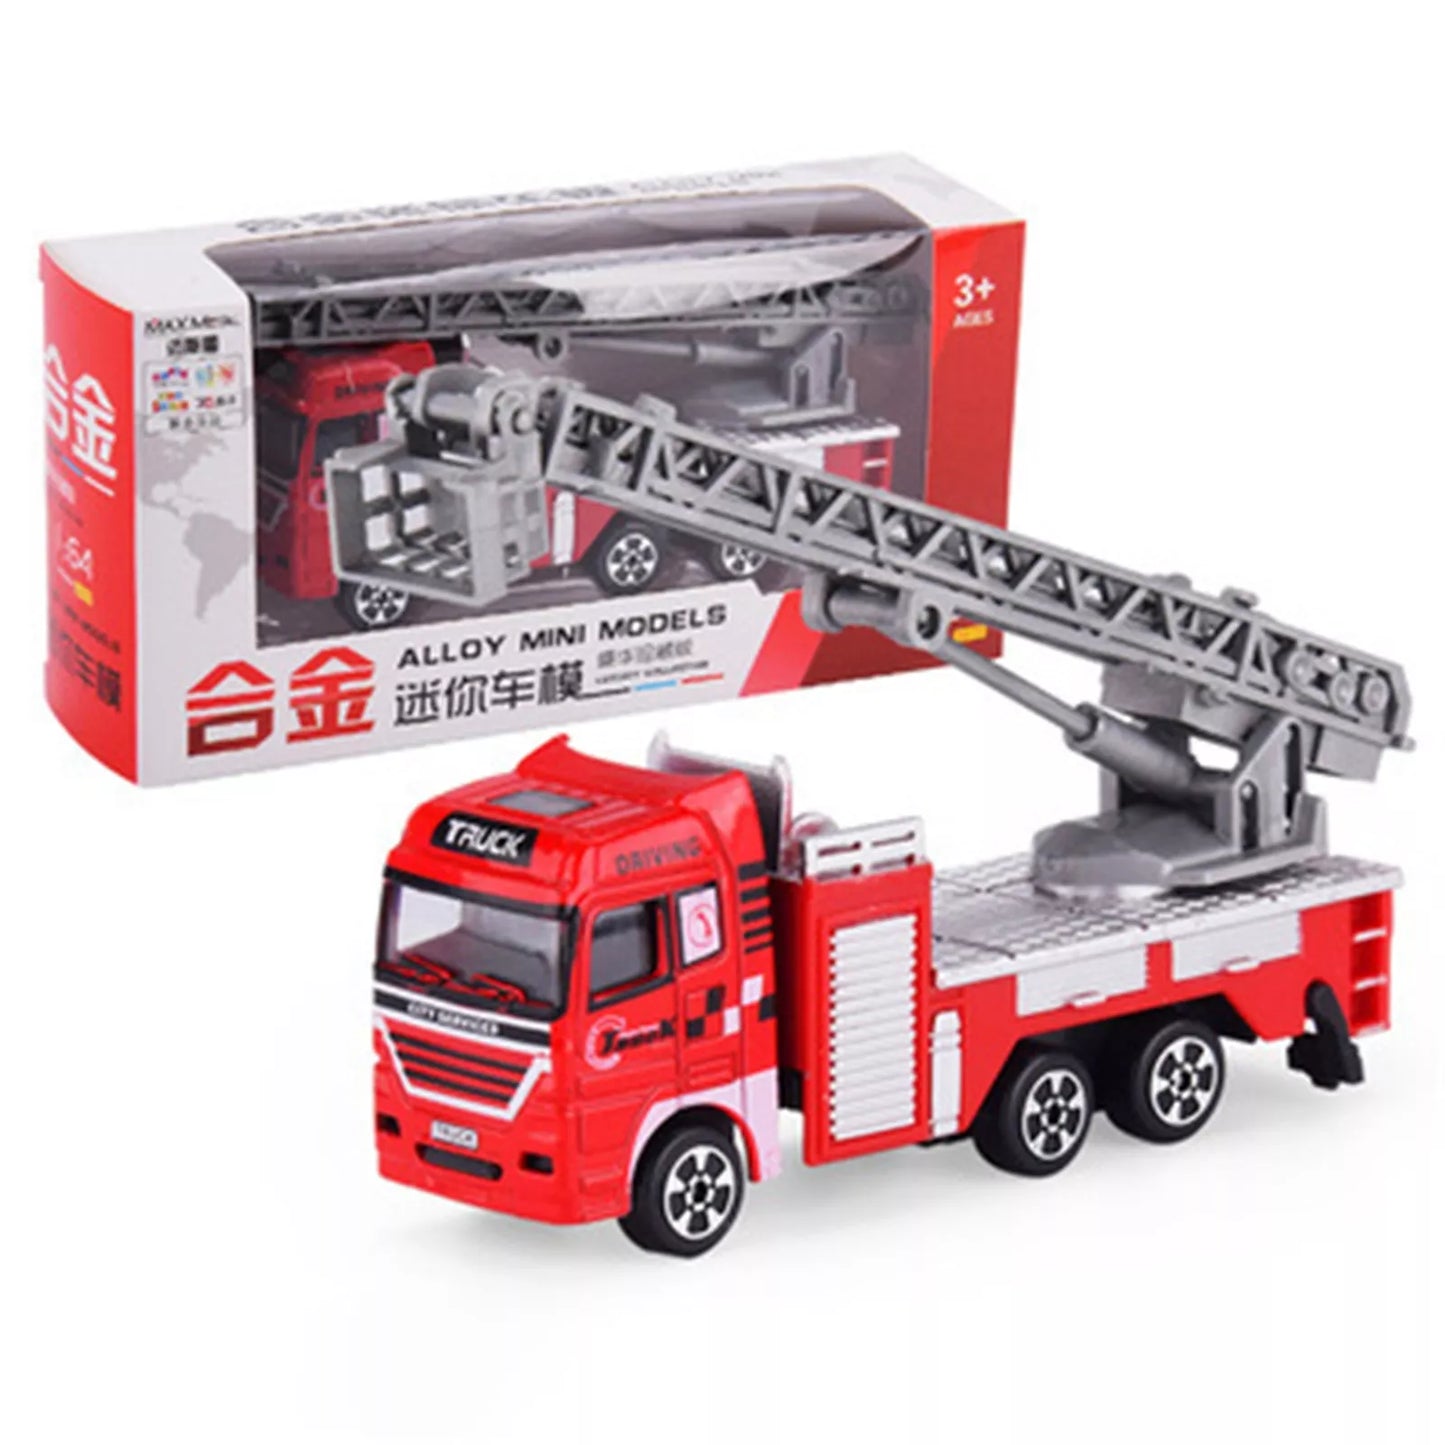 1:4 Scale Diecast Fire Truck Toy | Realistic Model from Mainland China